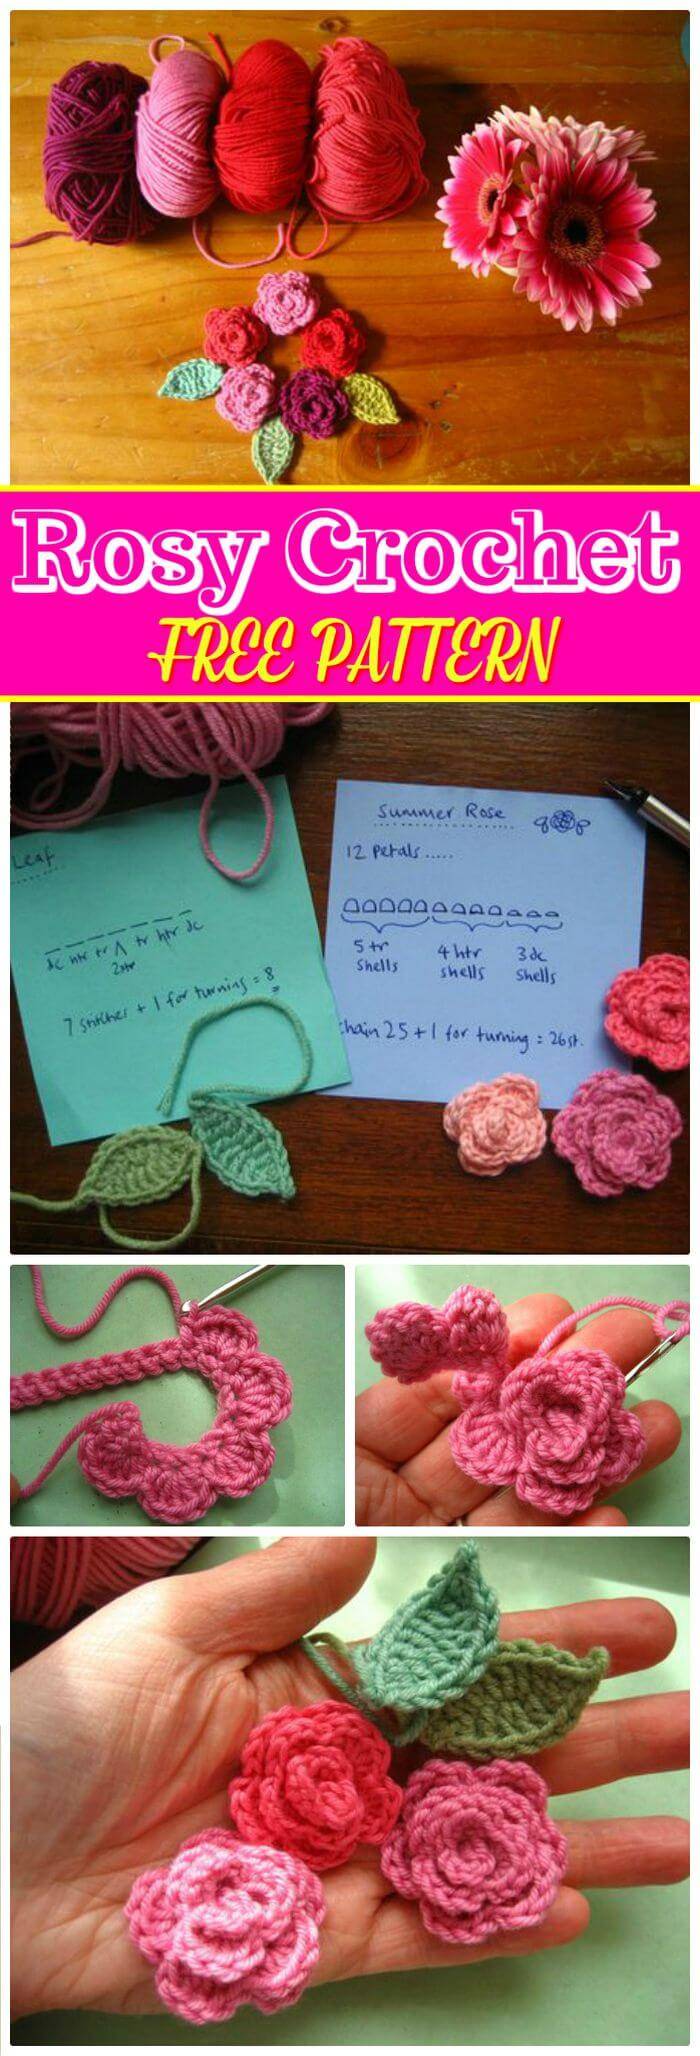 DIY Rosy Crochet Free Pattern, Easy to crochet flowers with free patterns! Crochet flowers with step-by-step instructions!